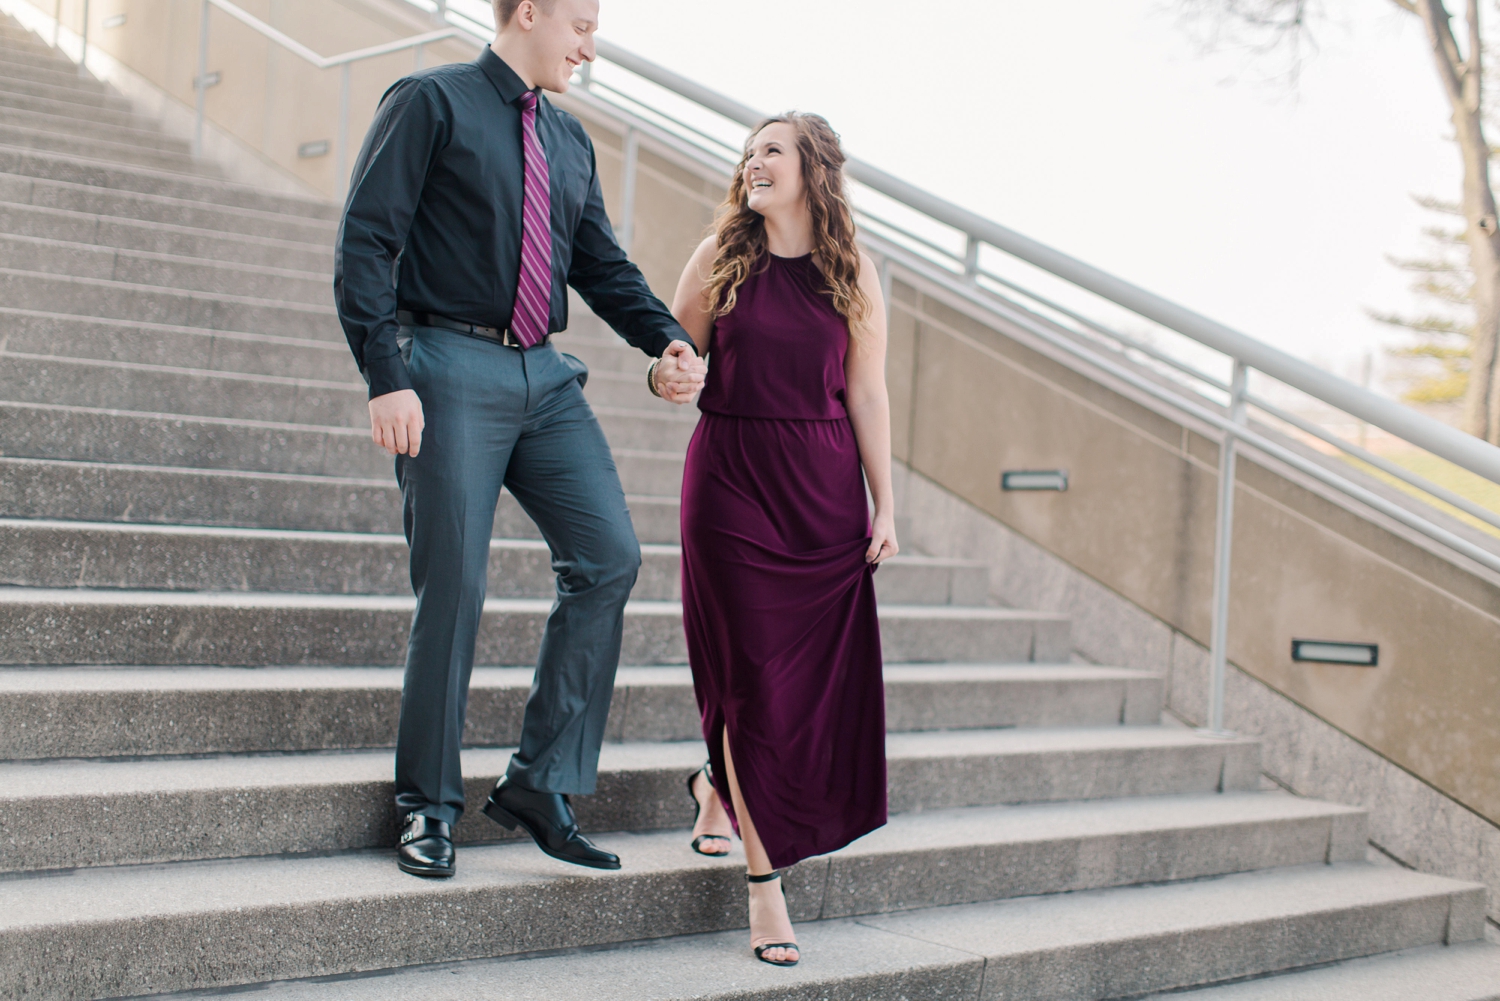 downtown-indianapolis-engagement-shoot_5949.jpg